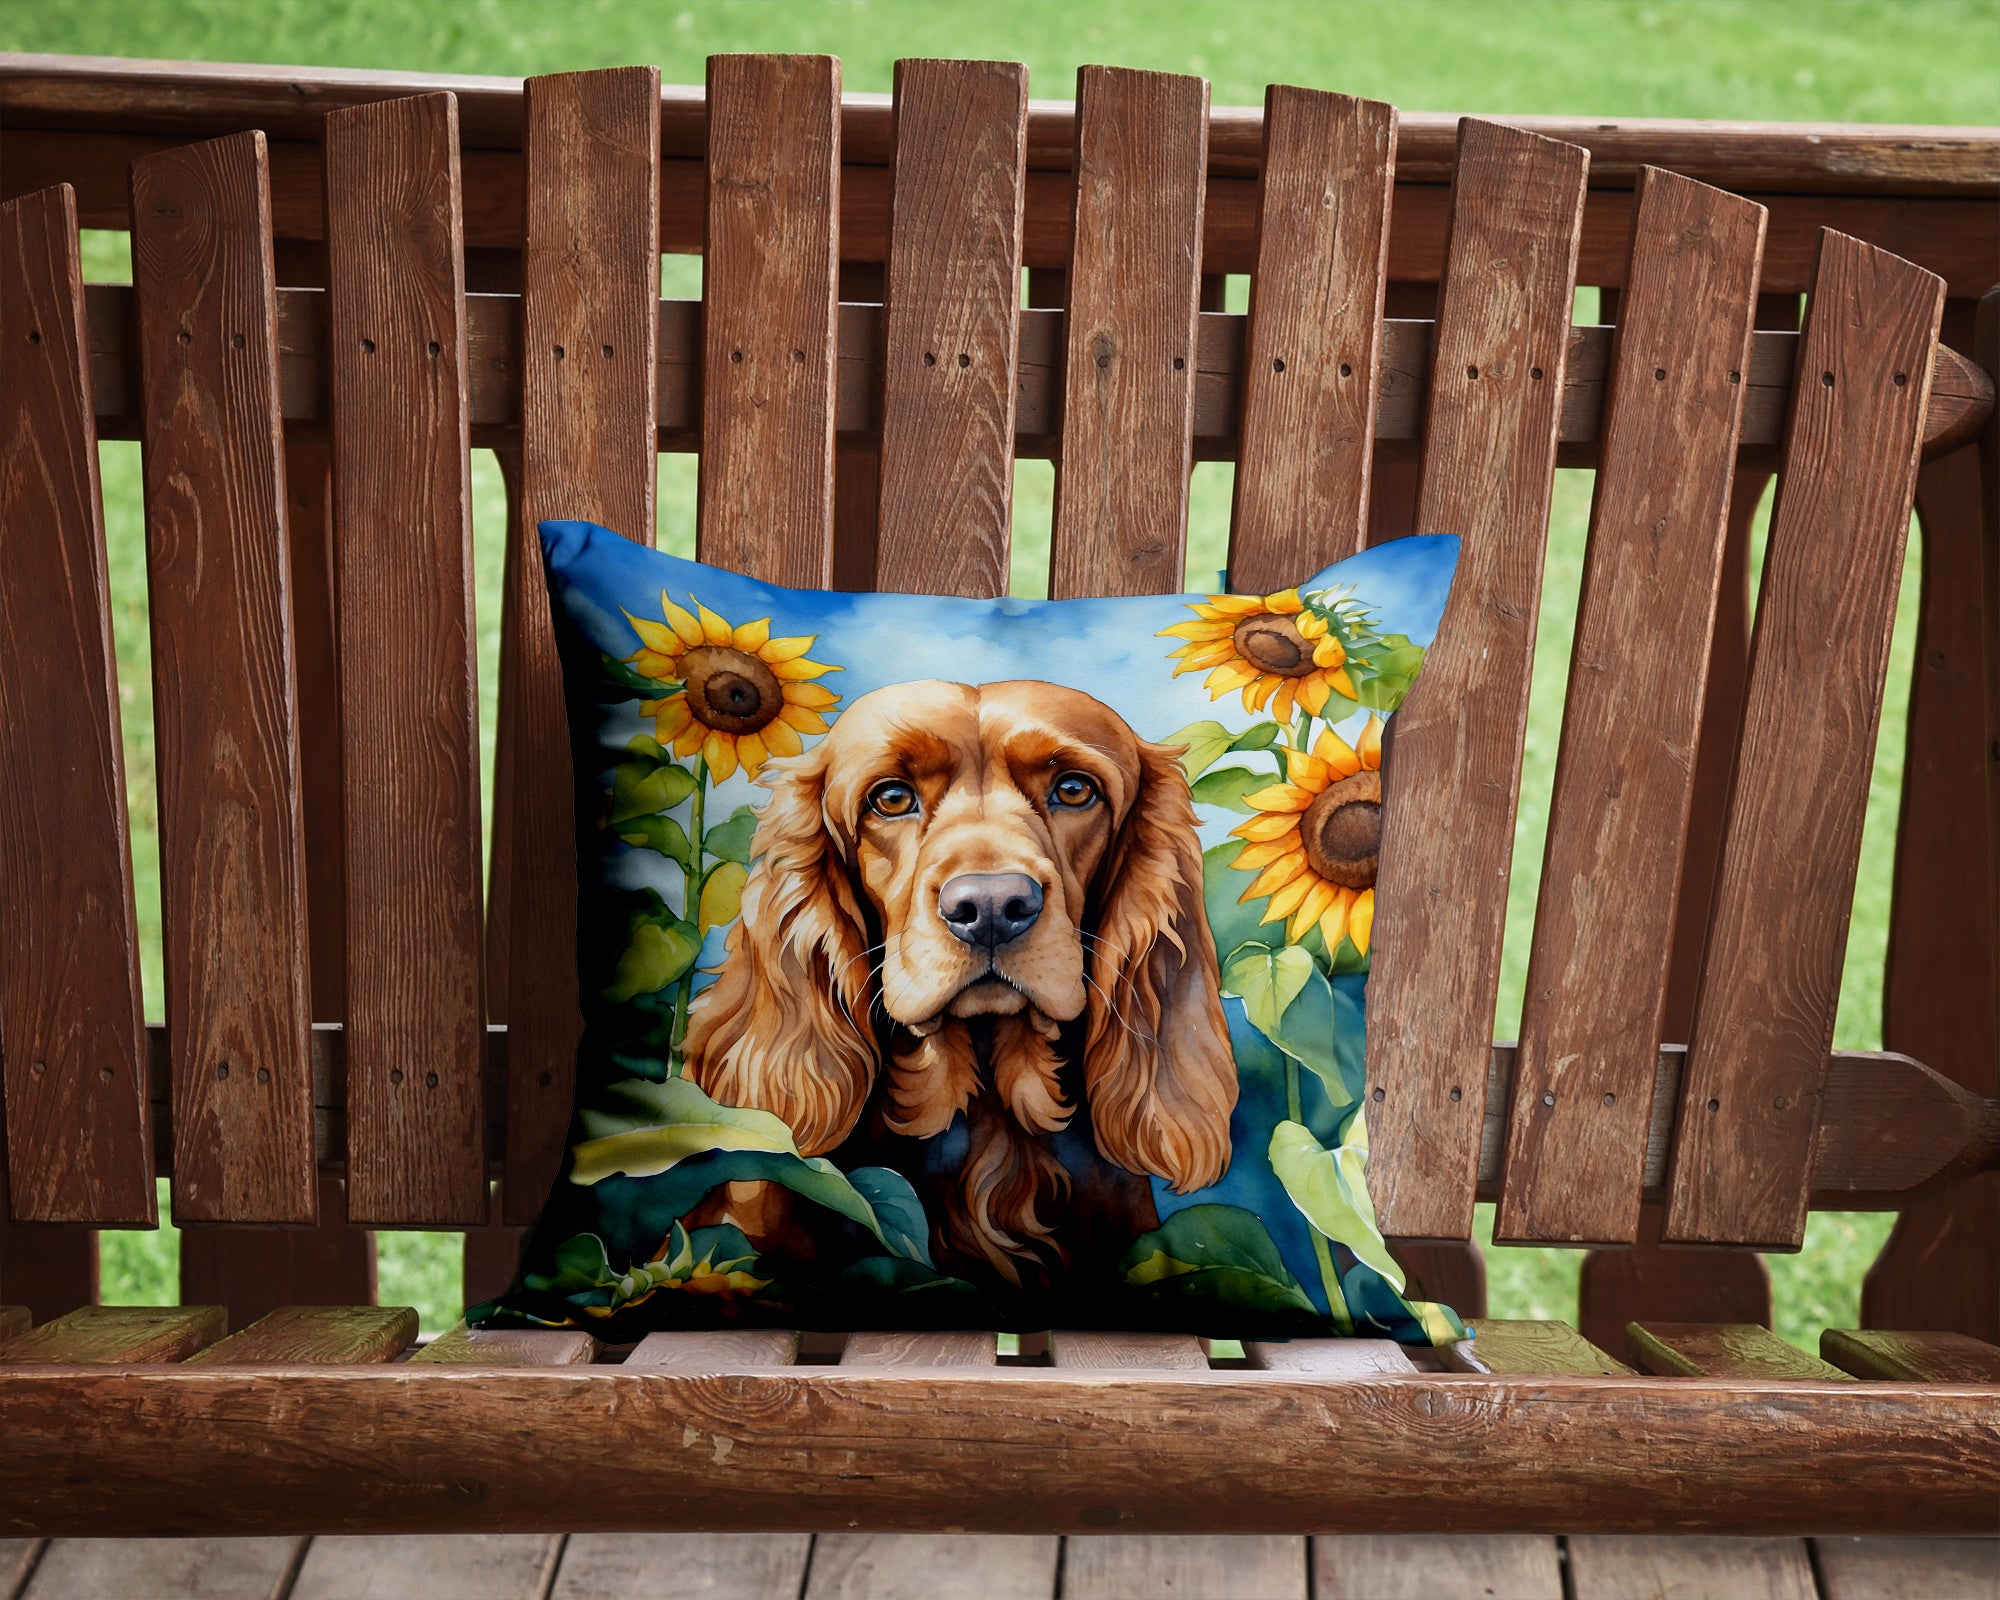 Buy this Cocker Spaniel in Sunflowers Throw Pillow